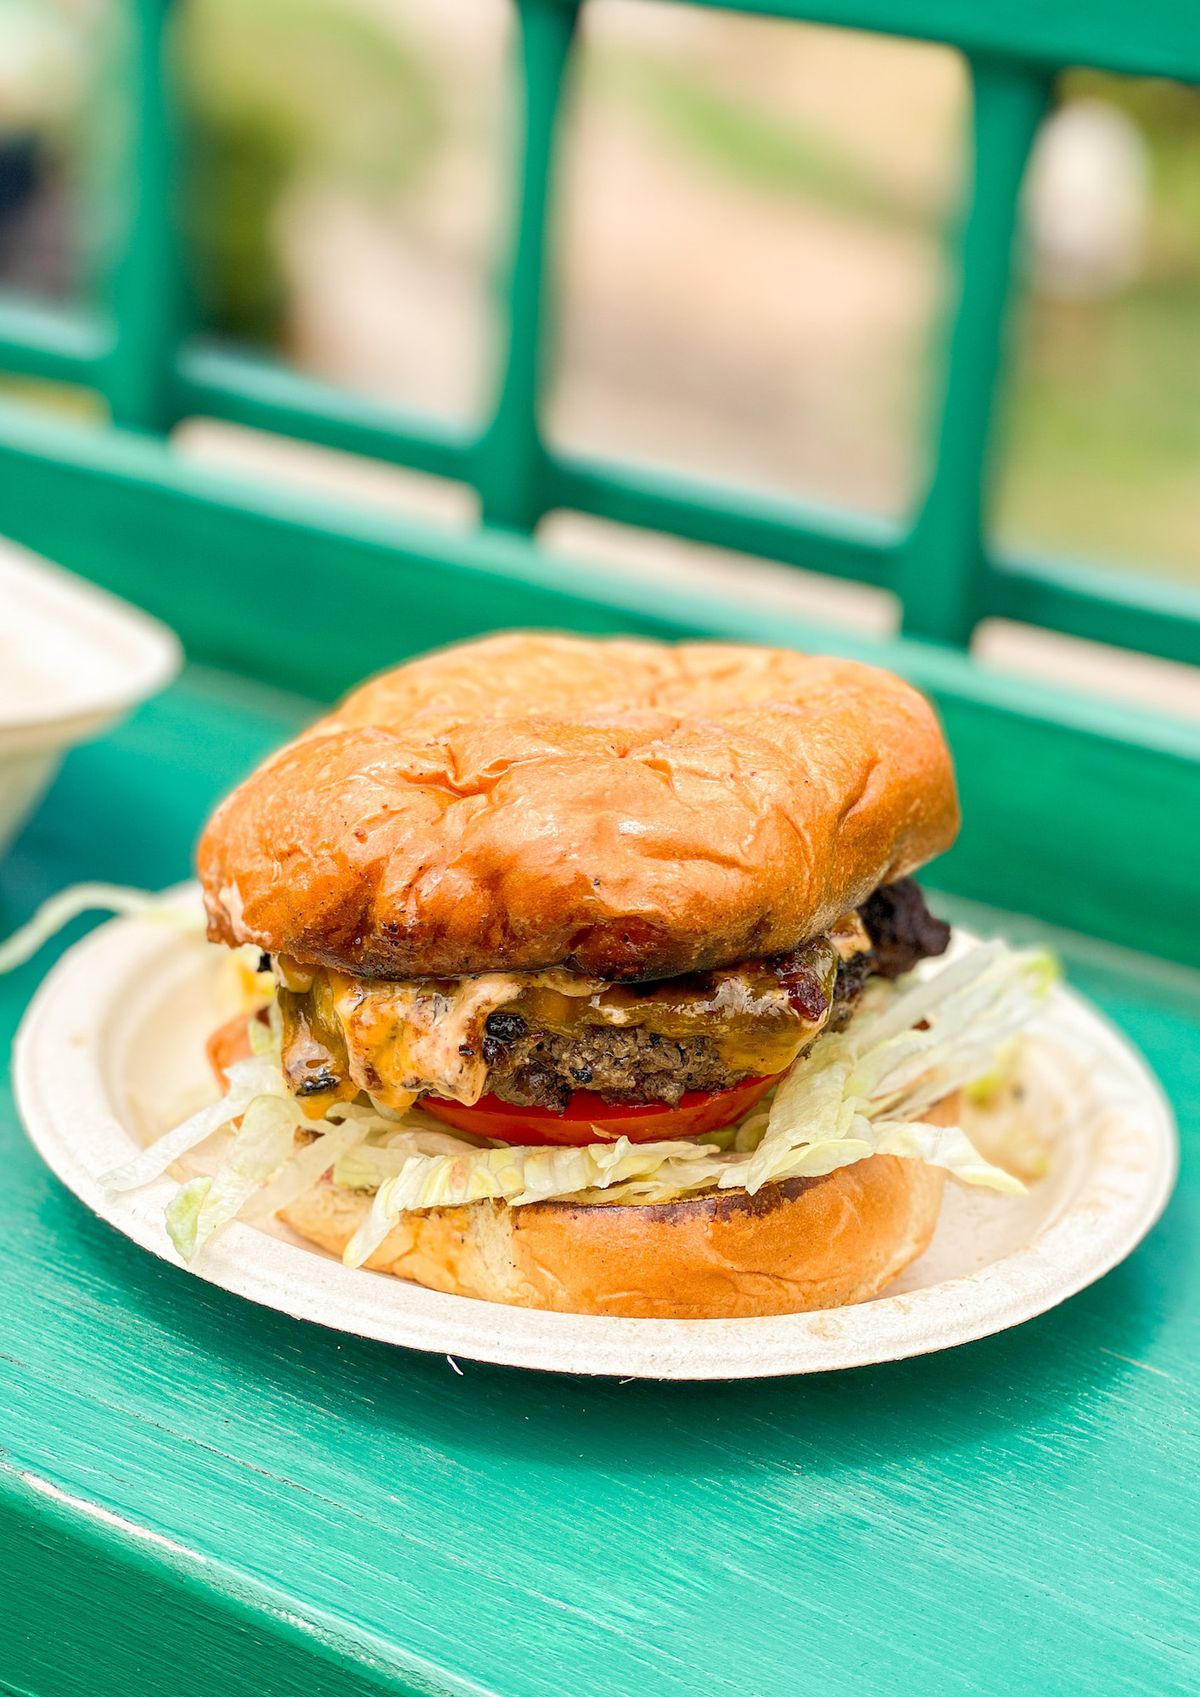 A backyard-style burger with dark edges and vegetables on a tan bun, shown up close.